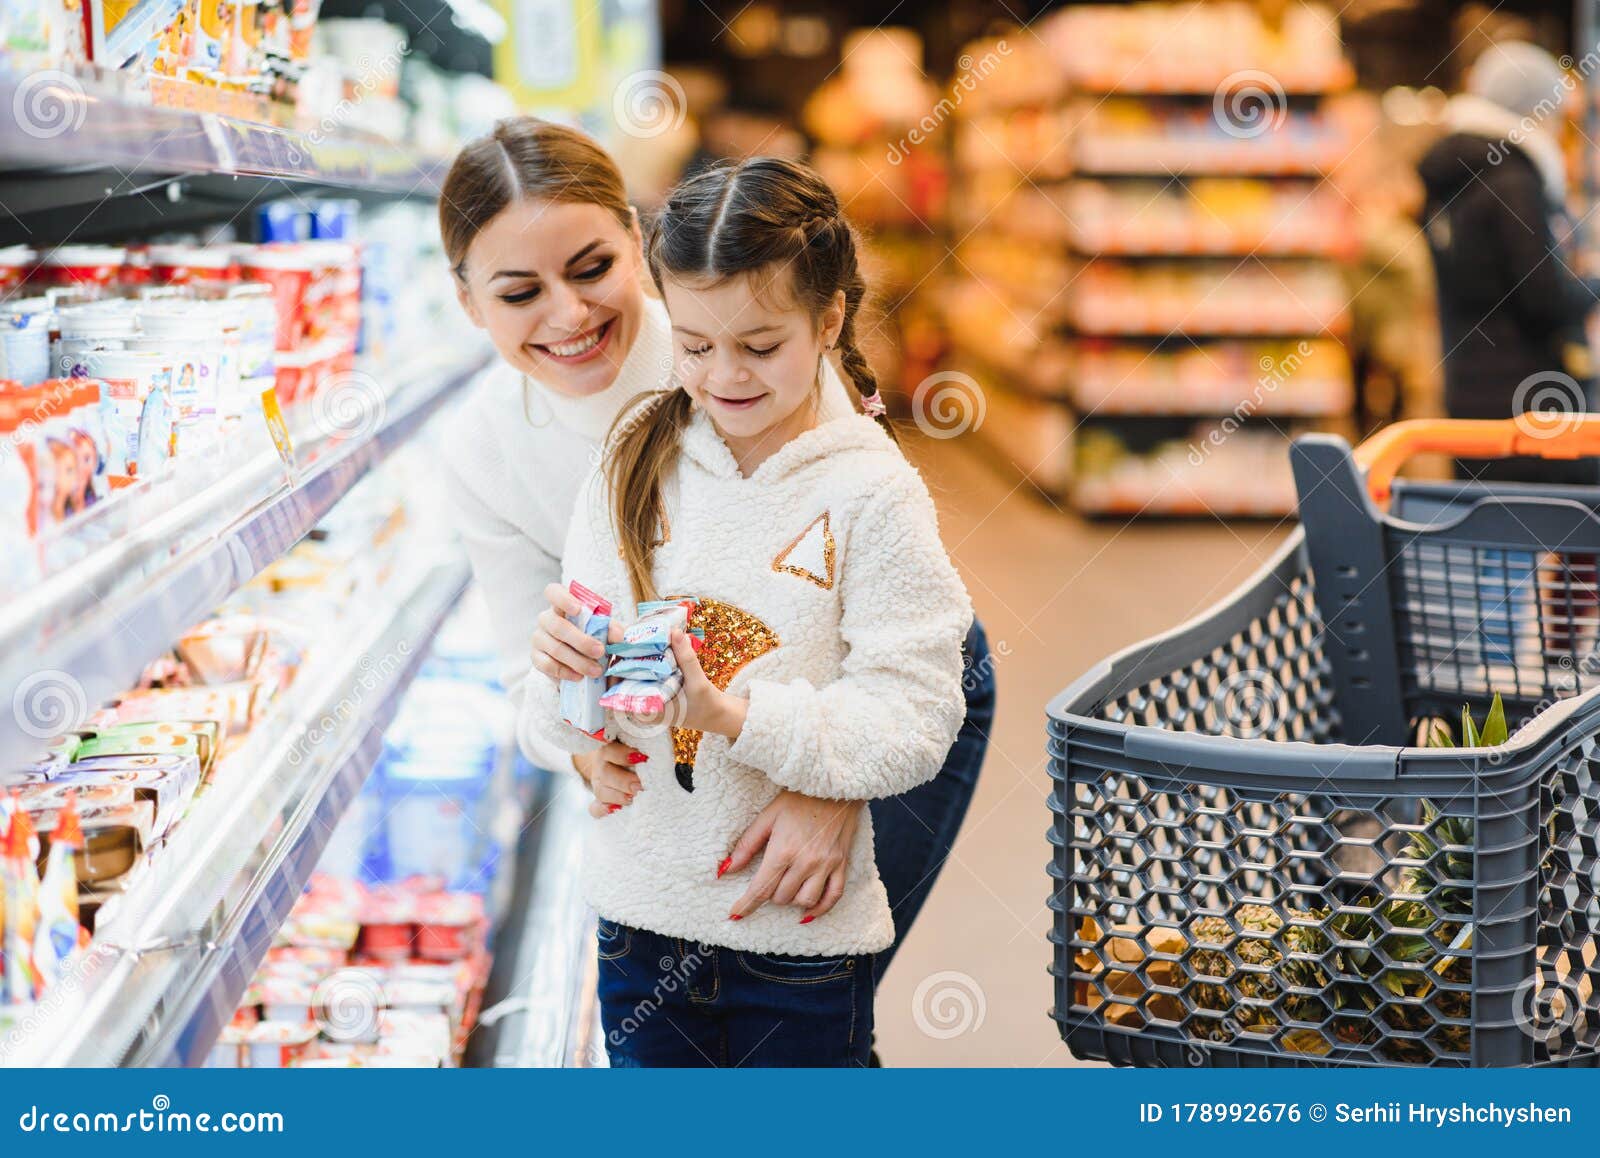 Mother with Daughter at a Grocery Store Stock Photo - Image of market ...